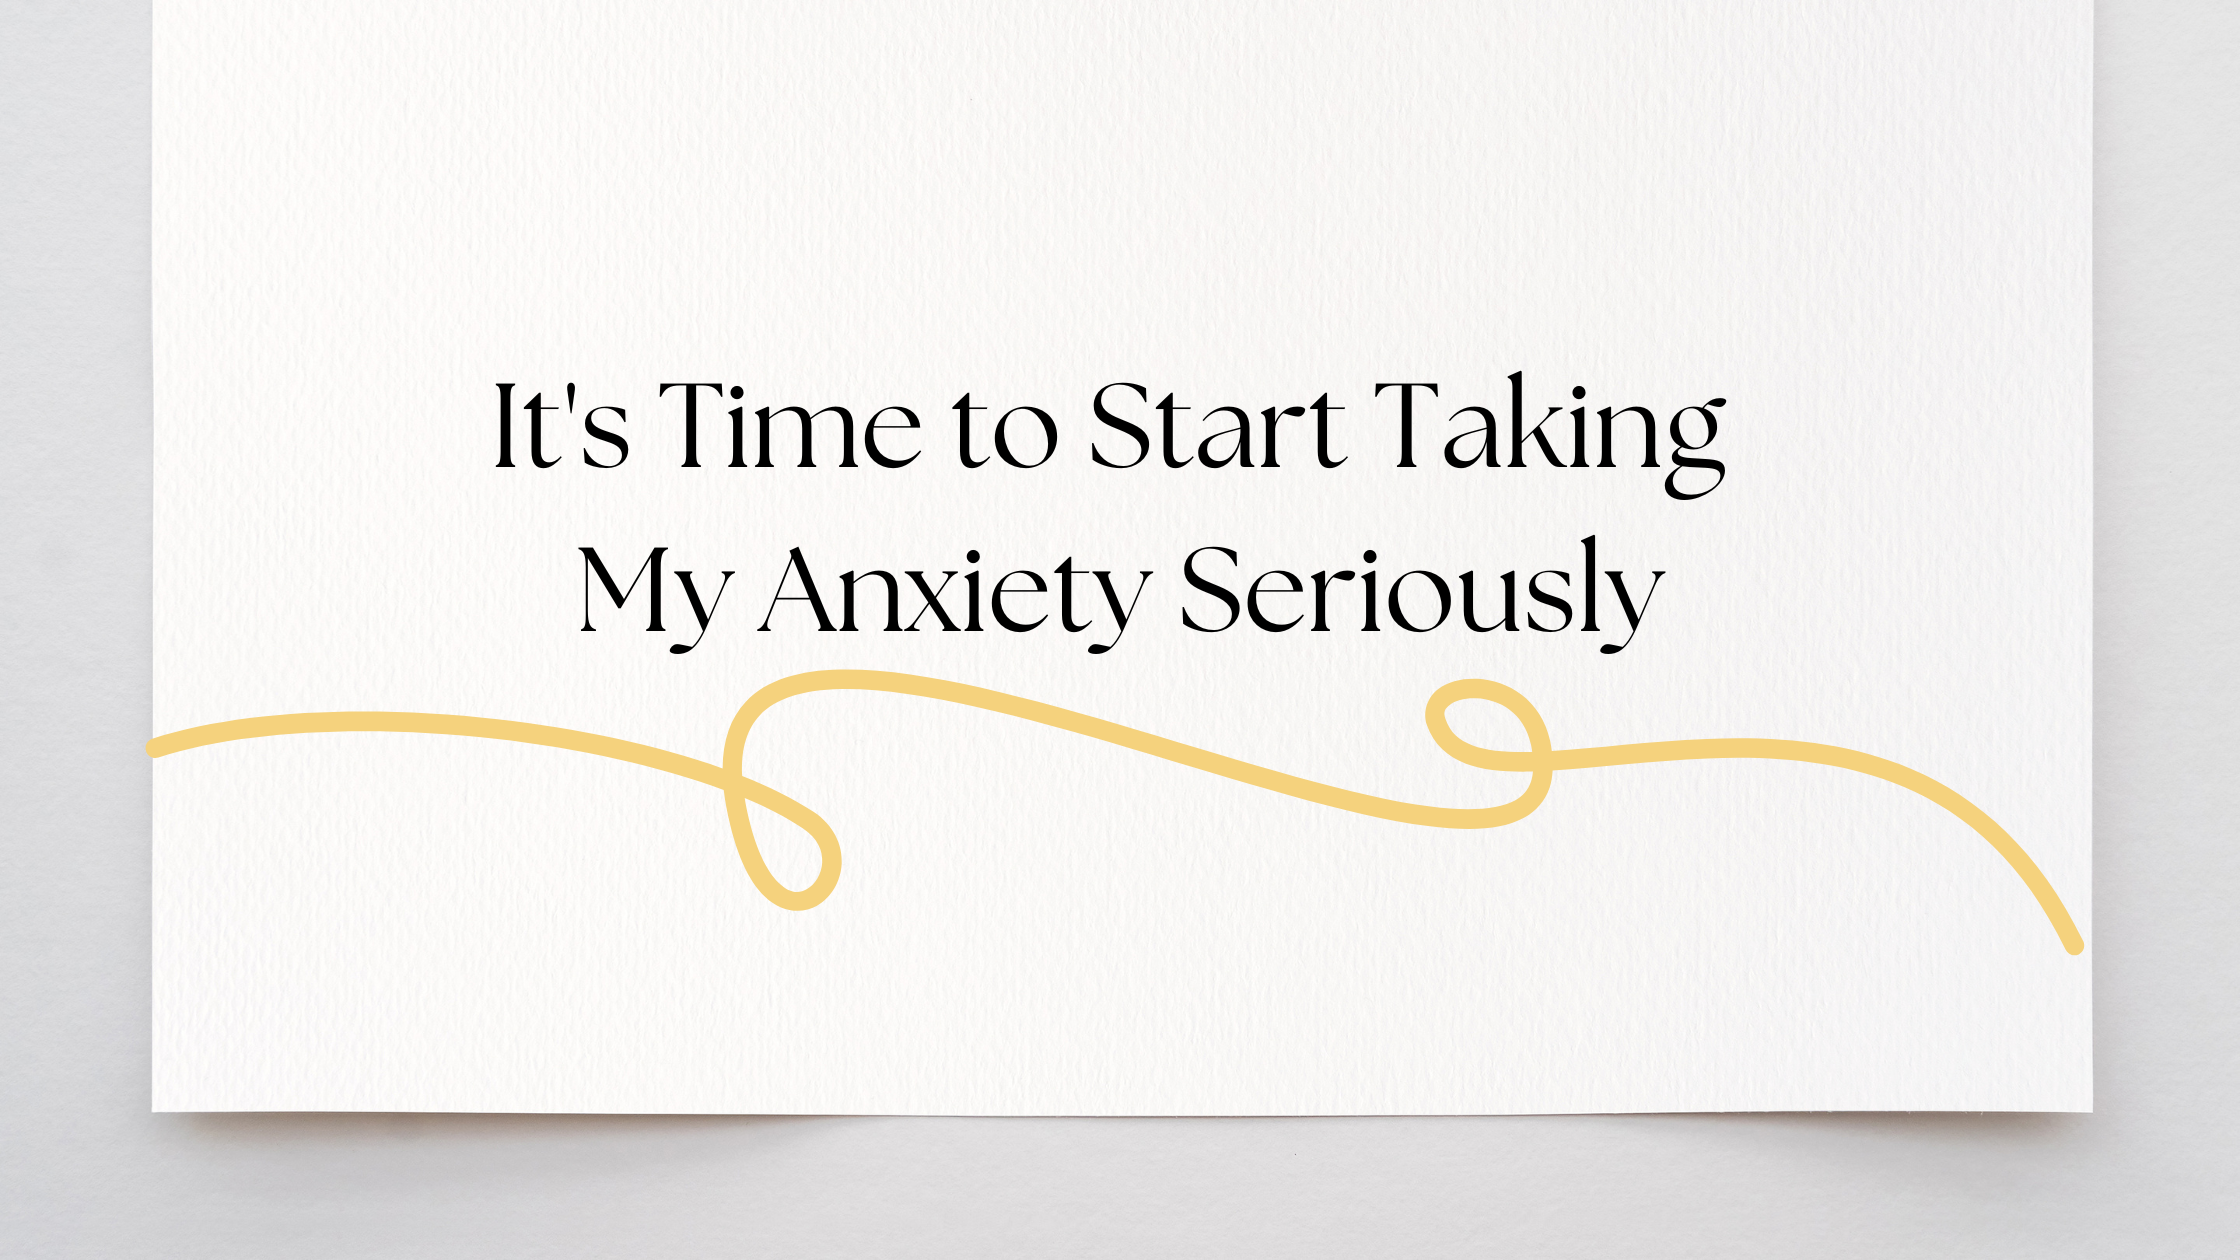 It’s Time to Start Taking My Anxiety Seriously